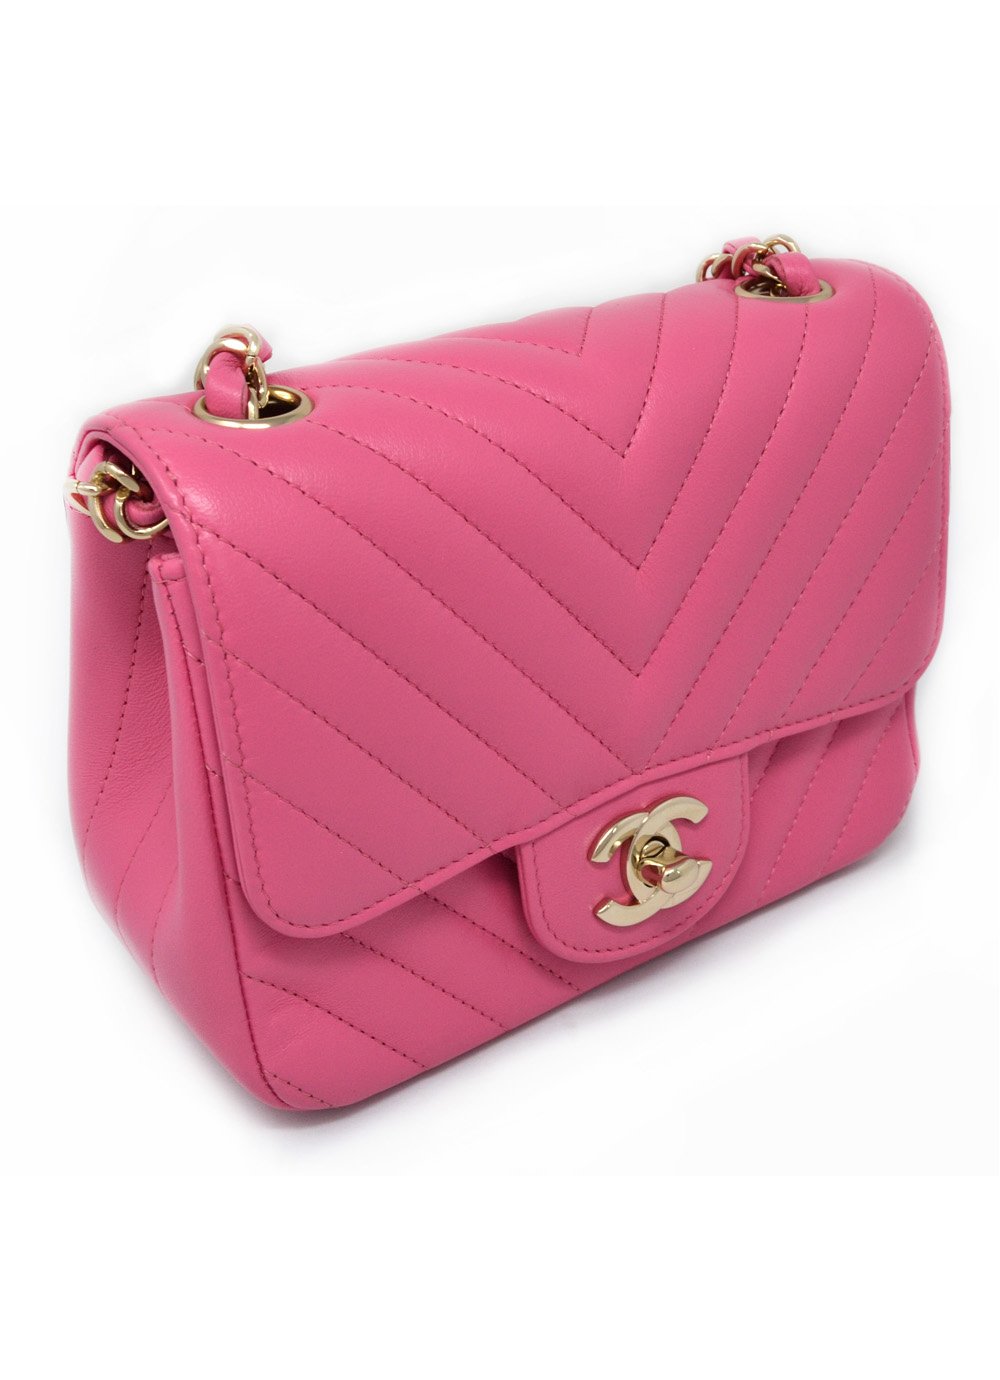 Lot 37 - Chanel Pink Chevron Quilted Mini Flap Bag